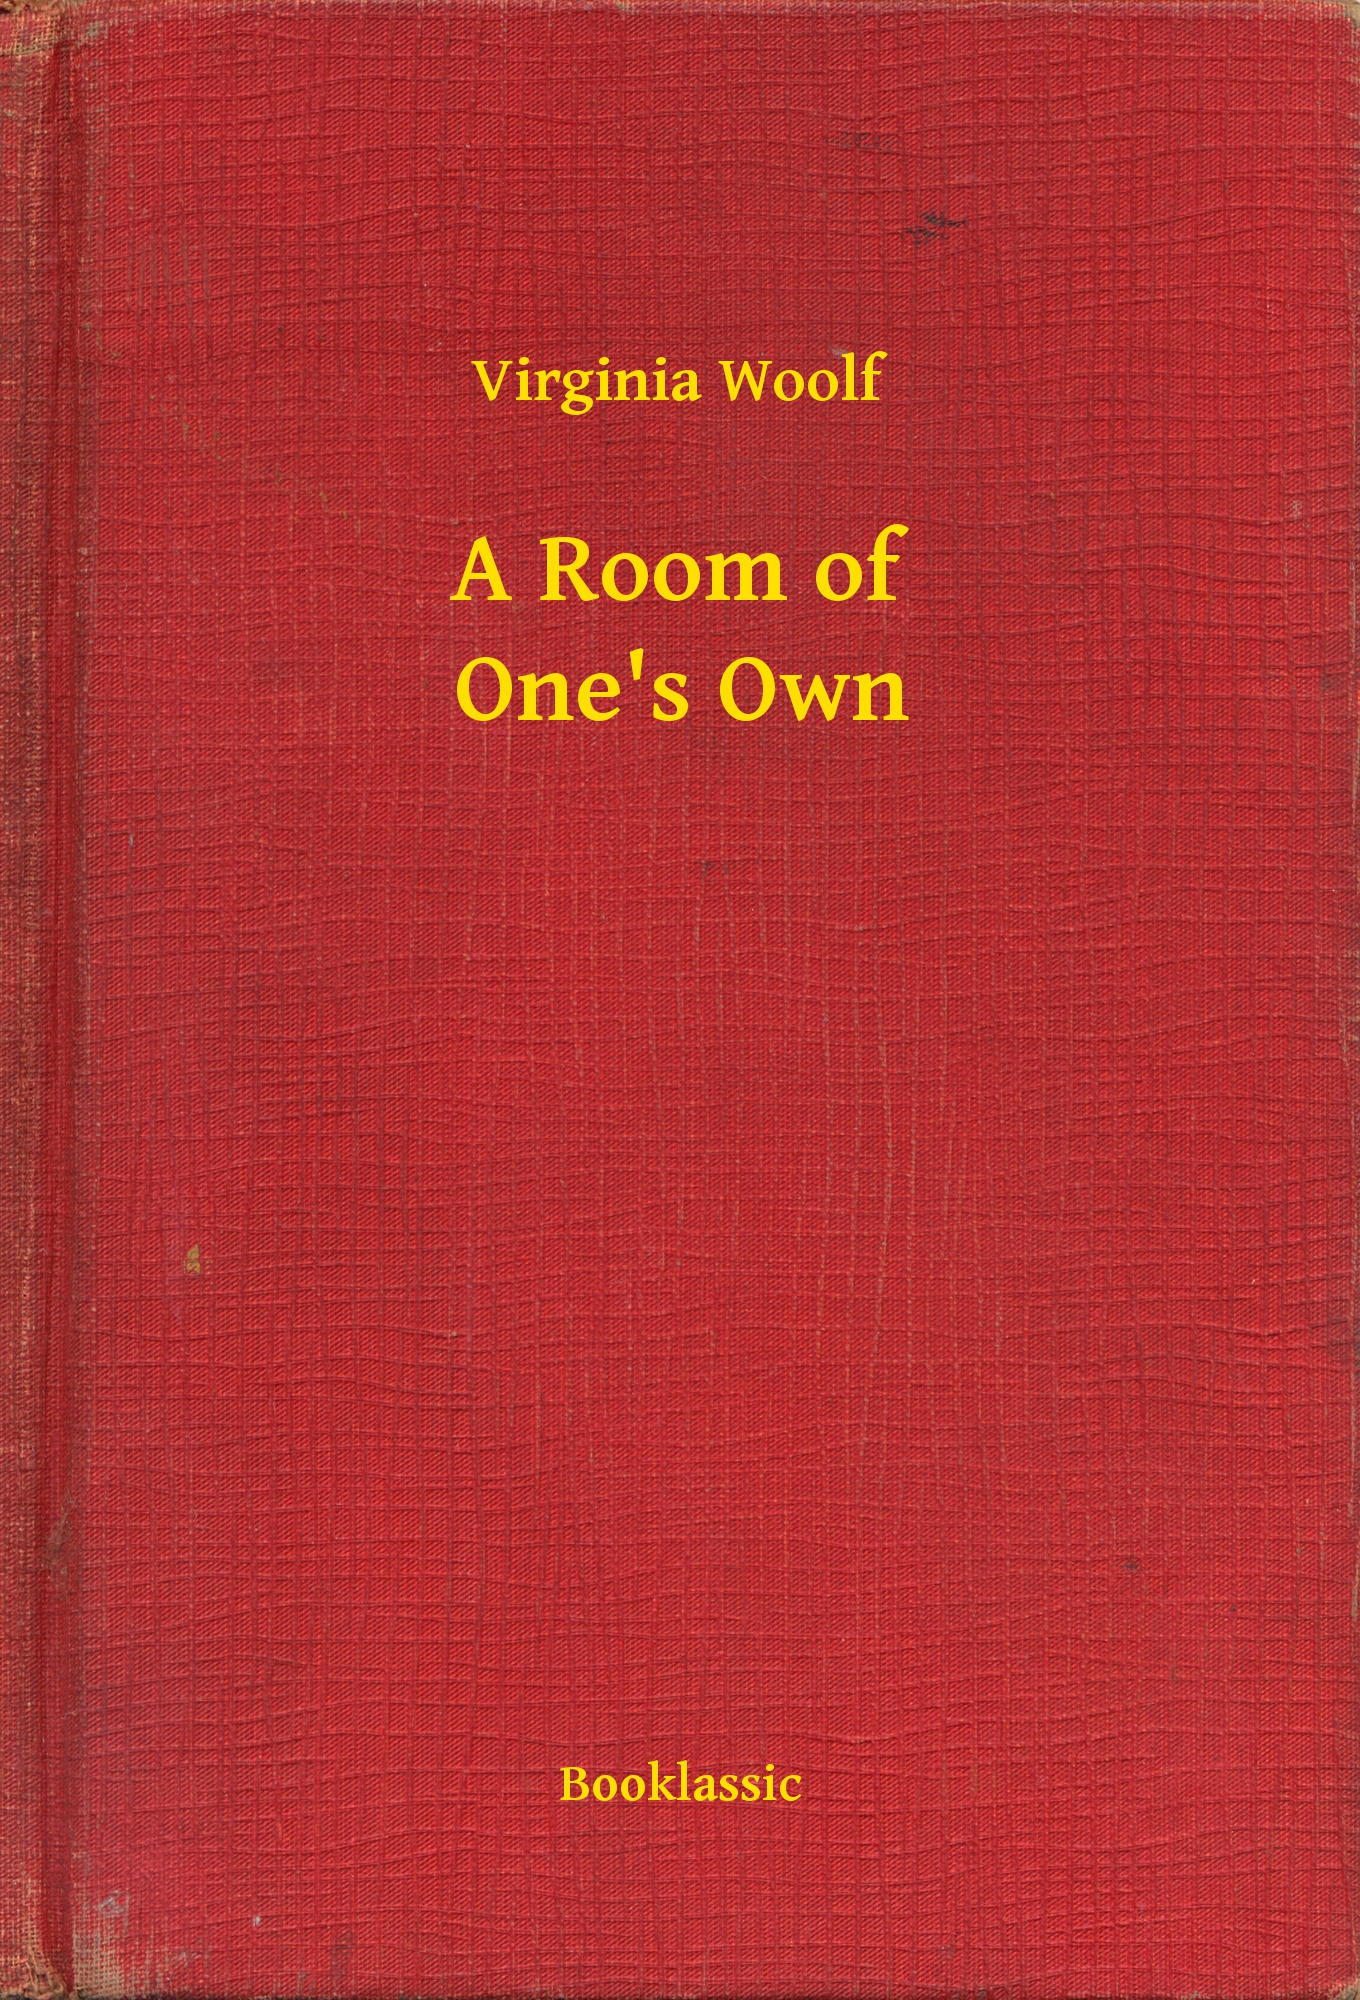 A Room of One"s Own